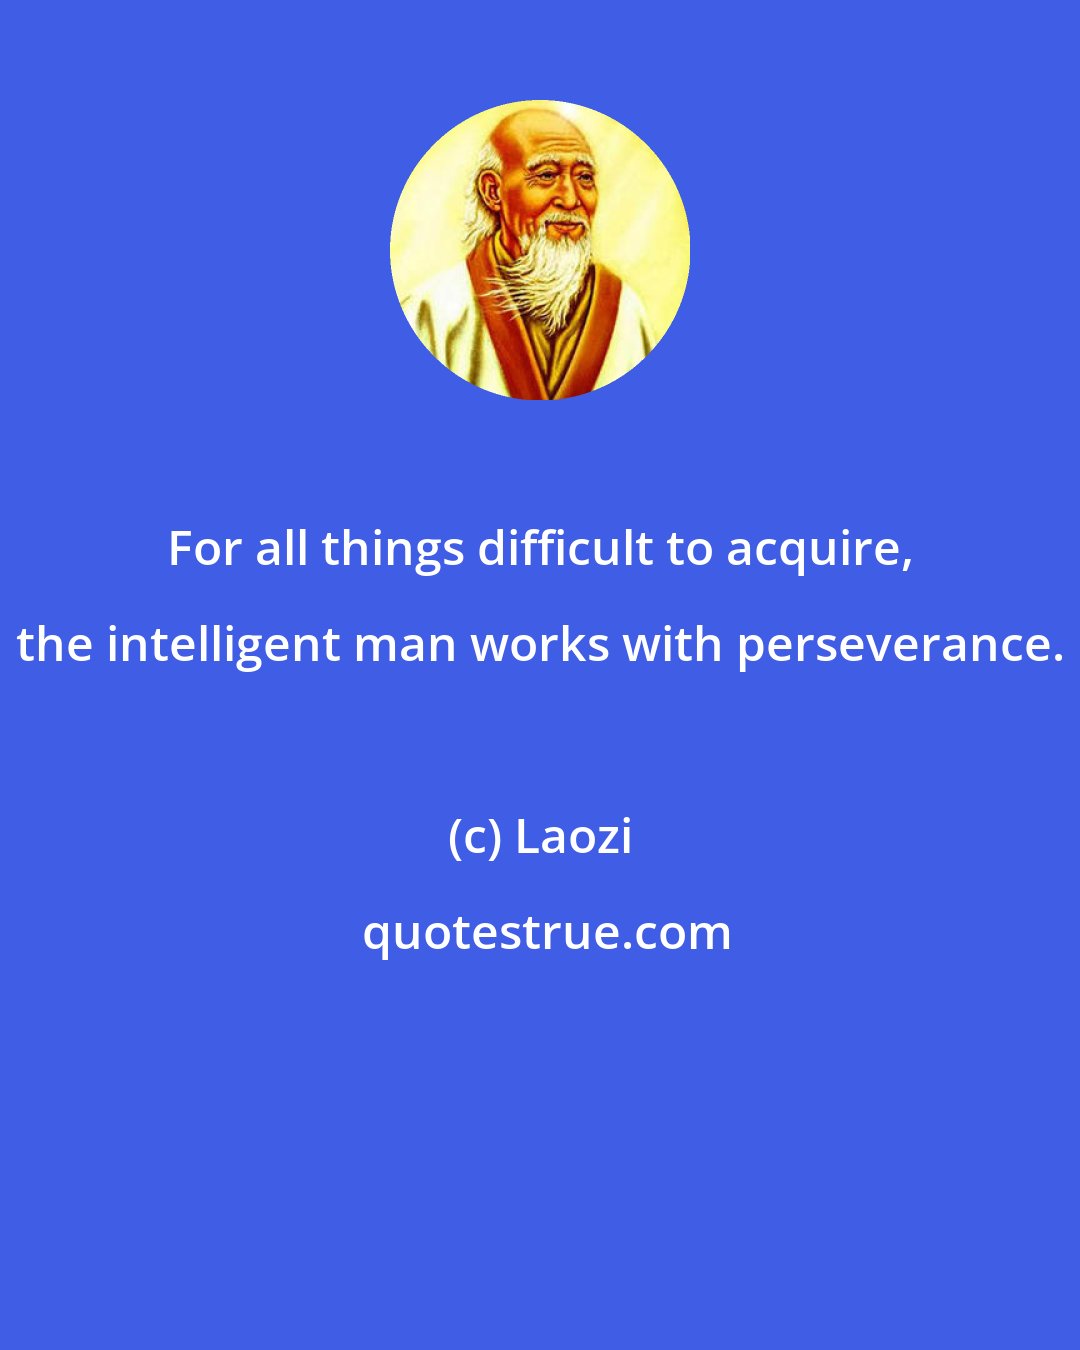 Laozi: For all things difficult to acquire, the intelligent man works with perseverance.